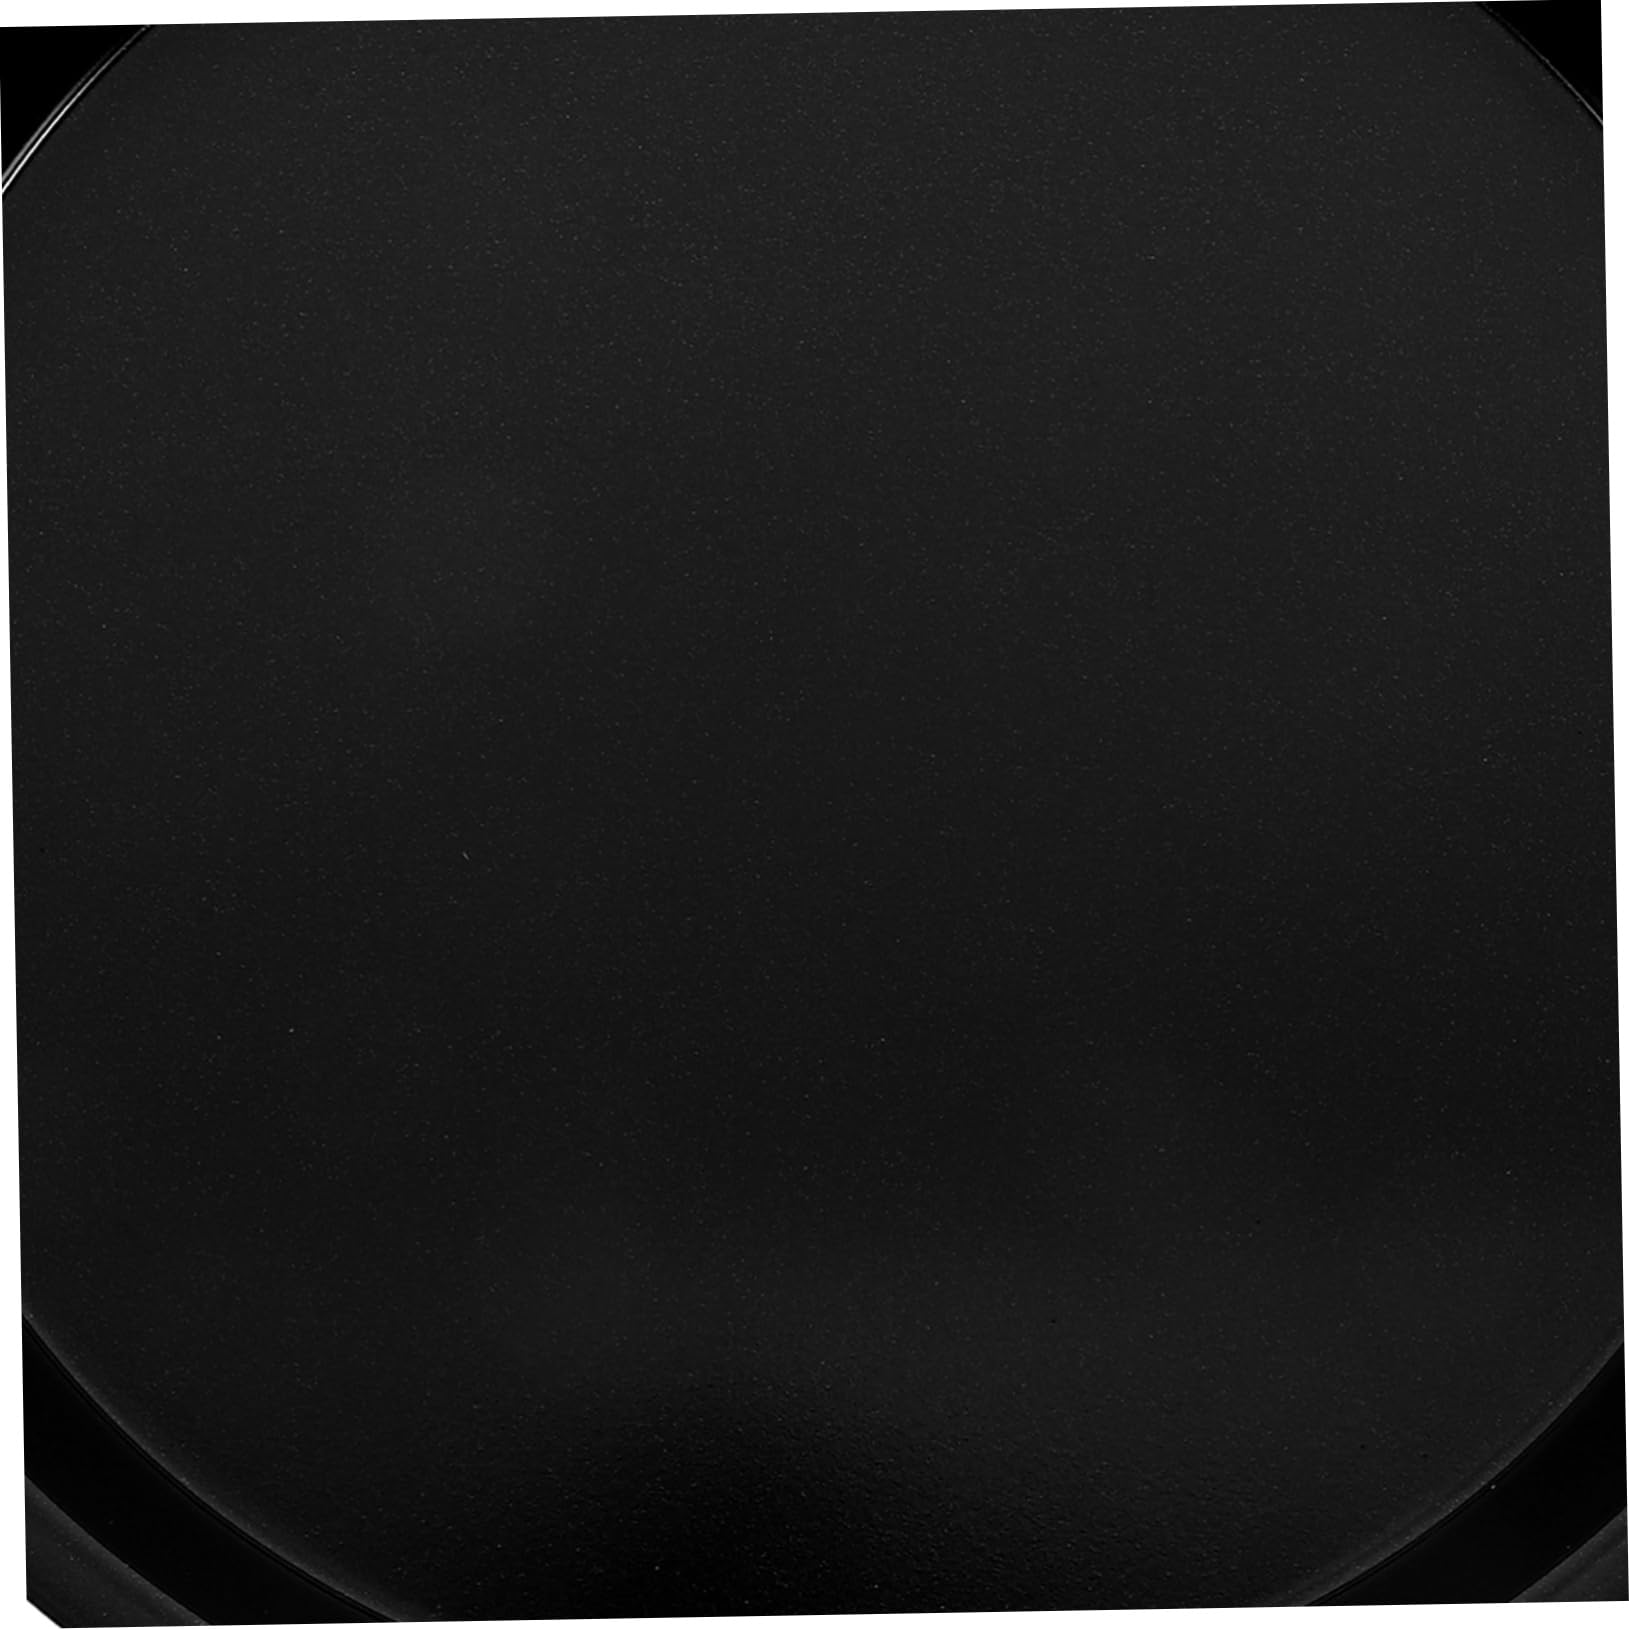 SHOWERORO Steel Cake Tray Pizza Pans Microwave Pizza Pan Pie Baking Tray 8 Inch Cake Pans Pizza Round Plate Crisper Pan Nonstick Bakeware Seafood Grill Pan Carbon Steel Oven Baking Pan